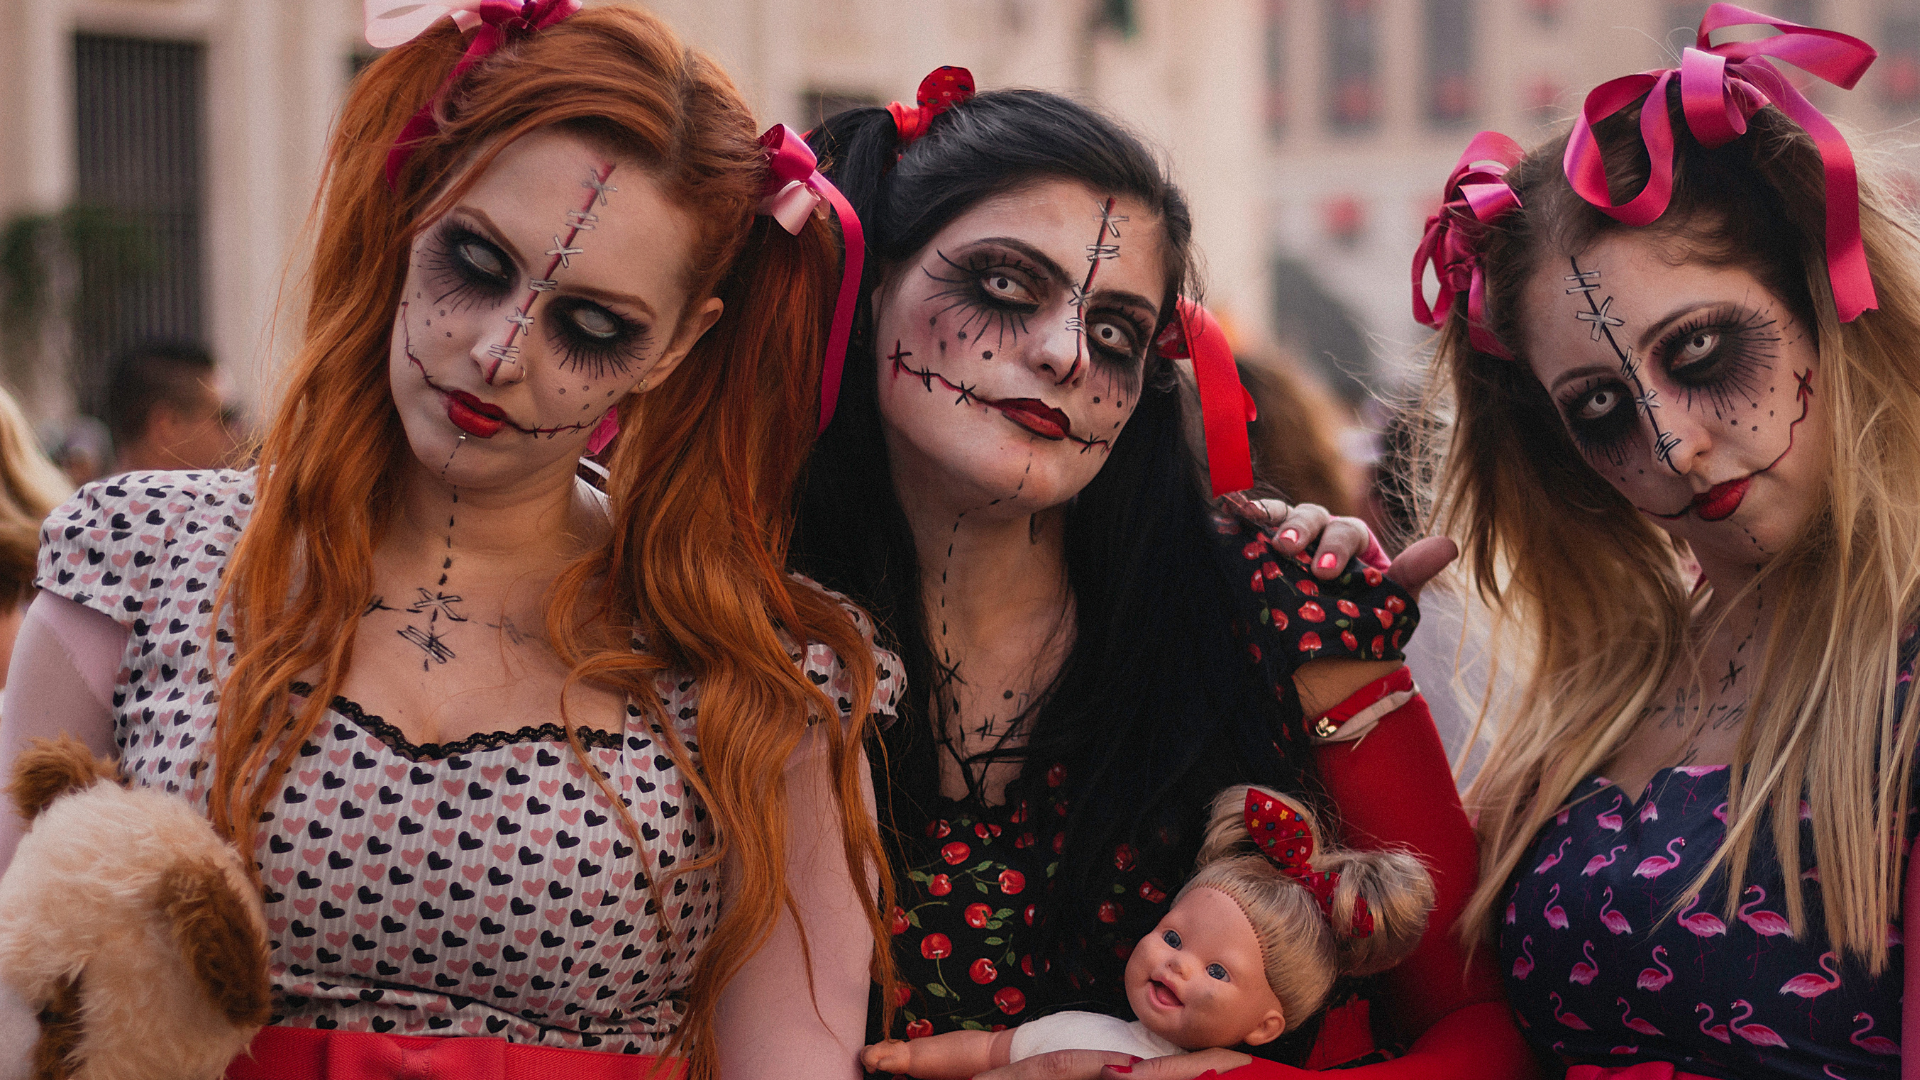 9 More Group Halloween Costumes For Redheads